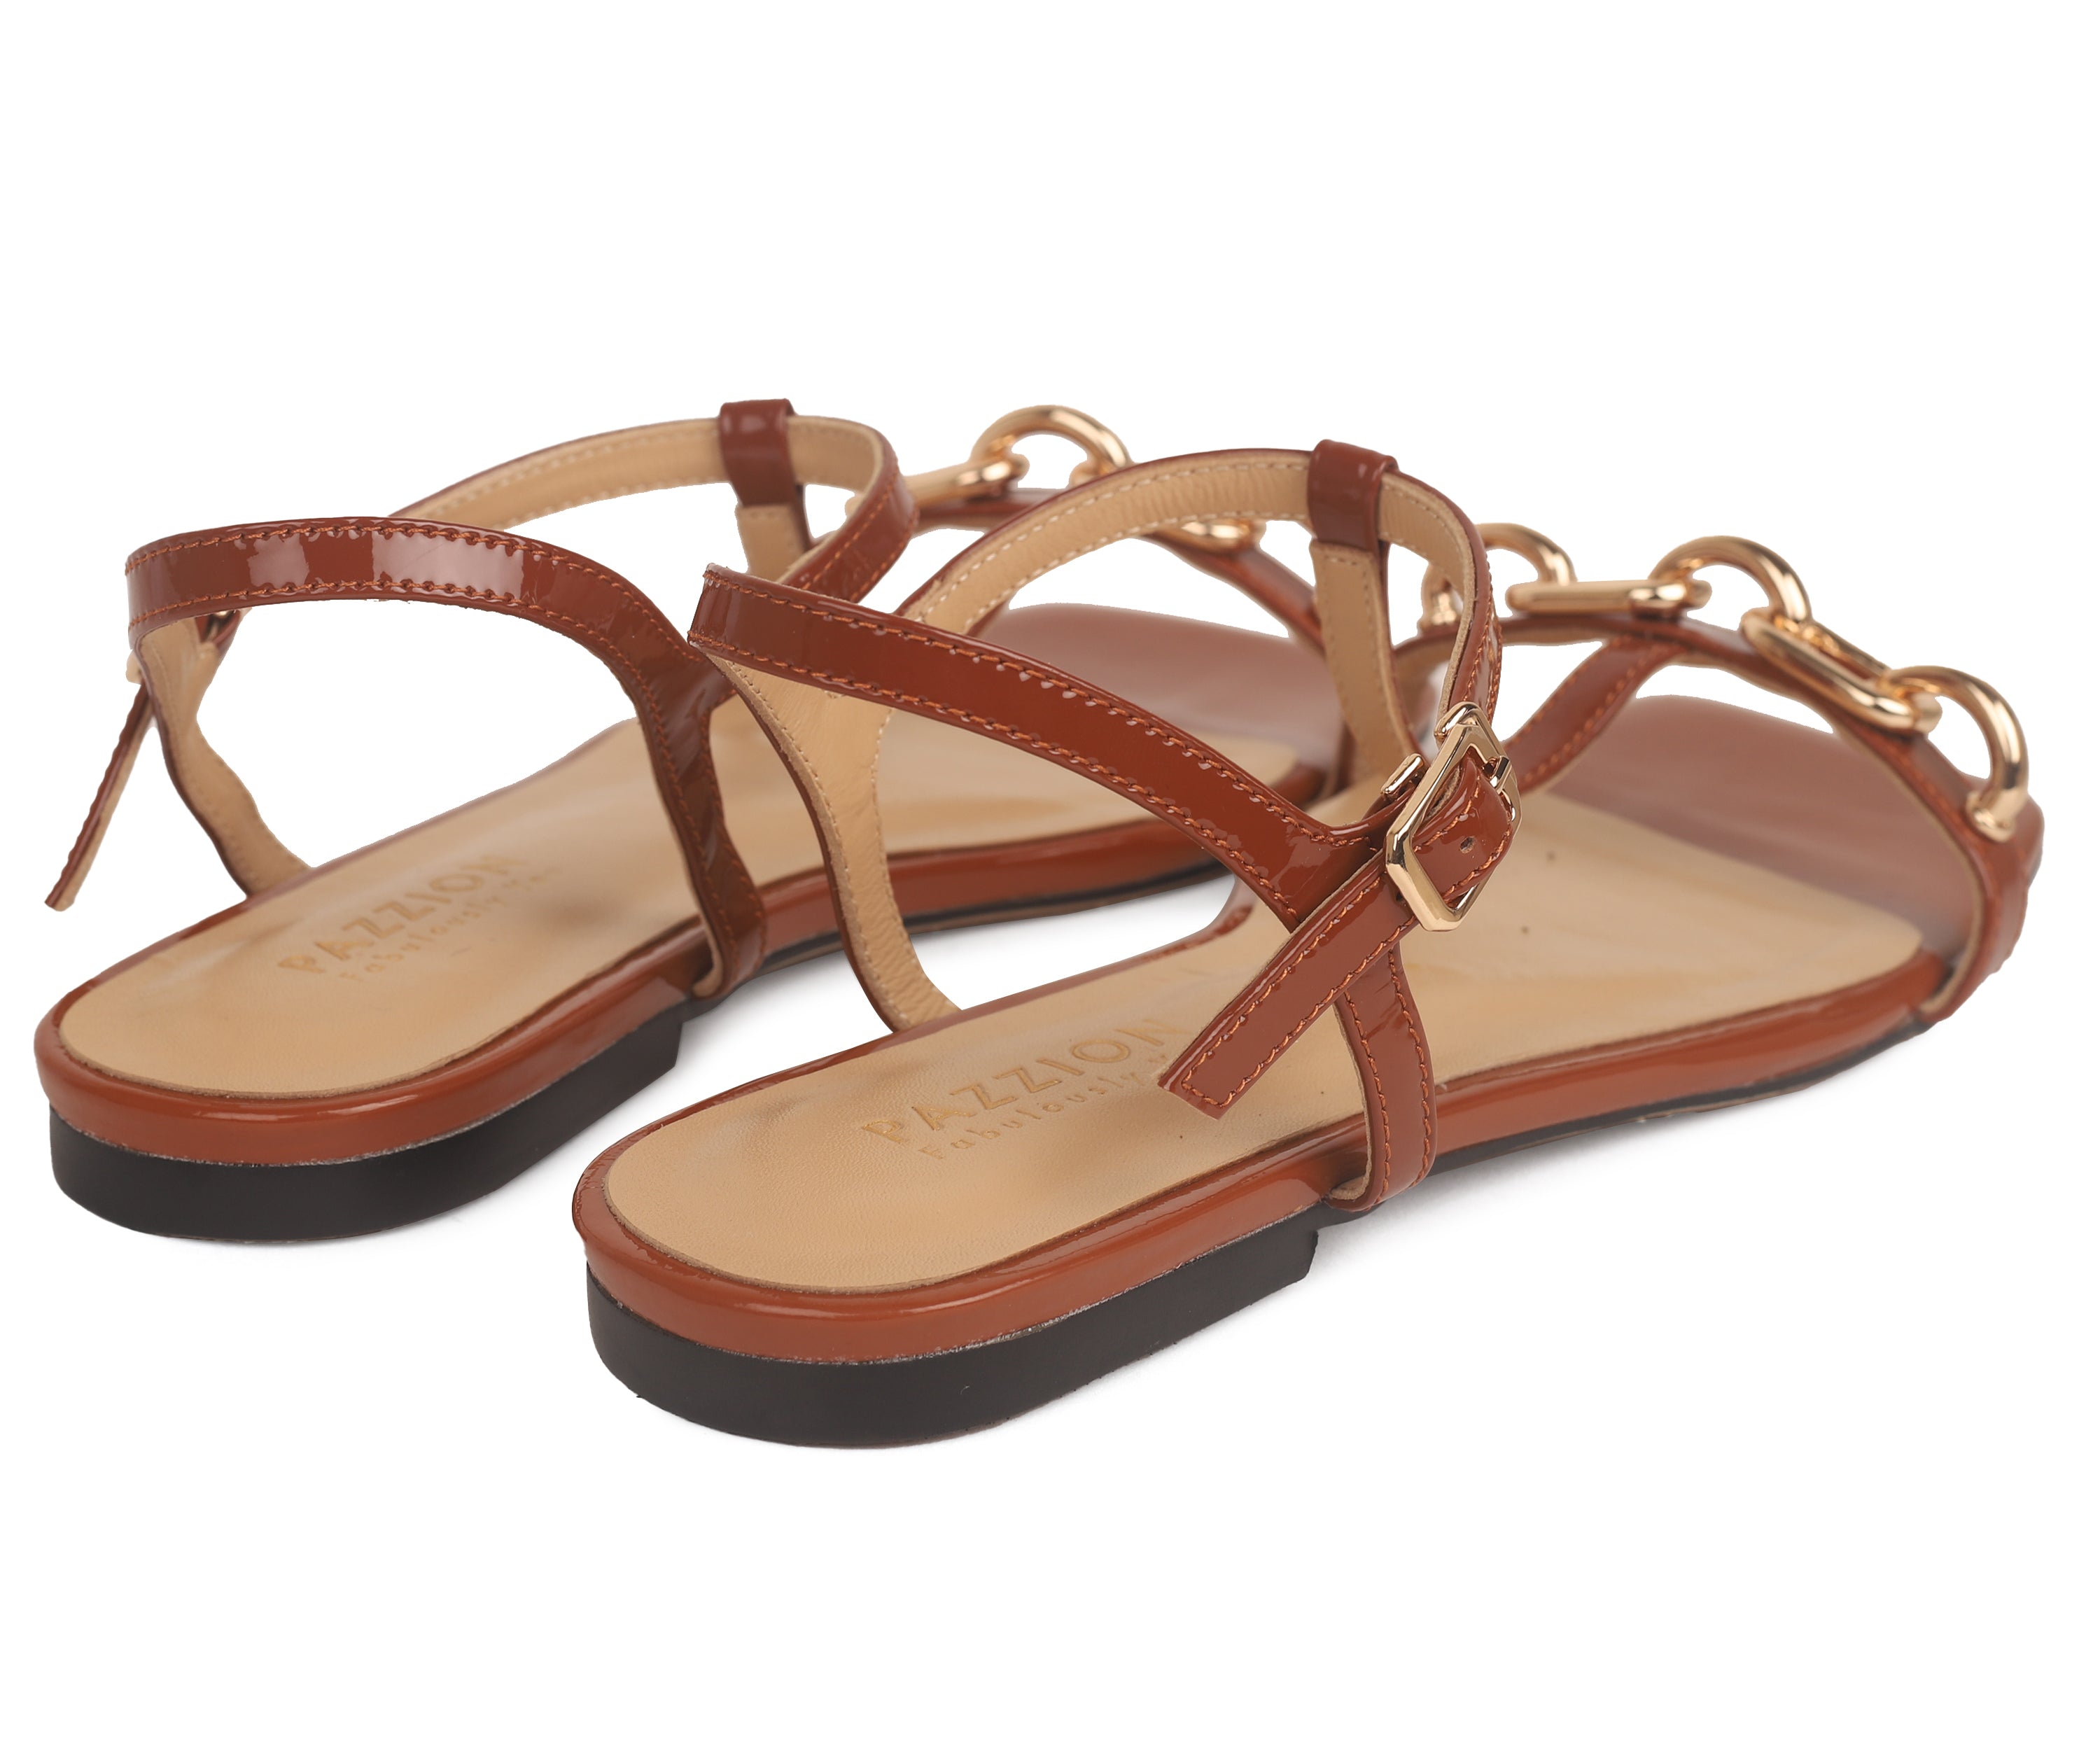 2168-2 Brown Back Strap style & comfort